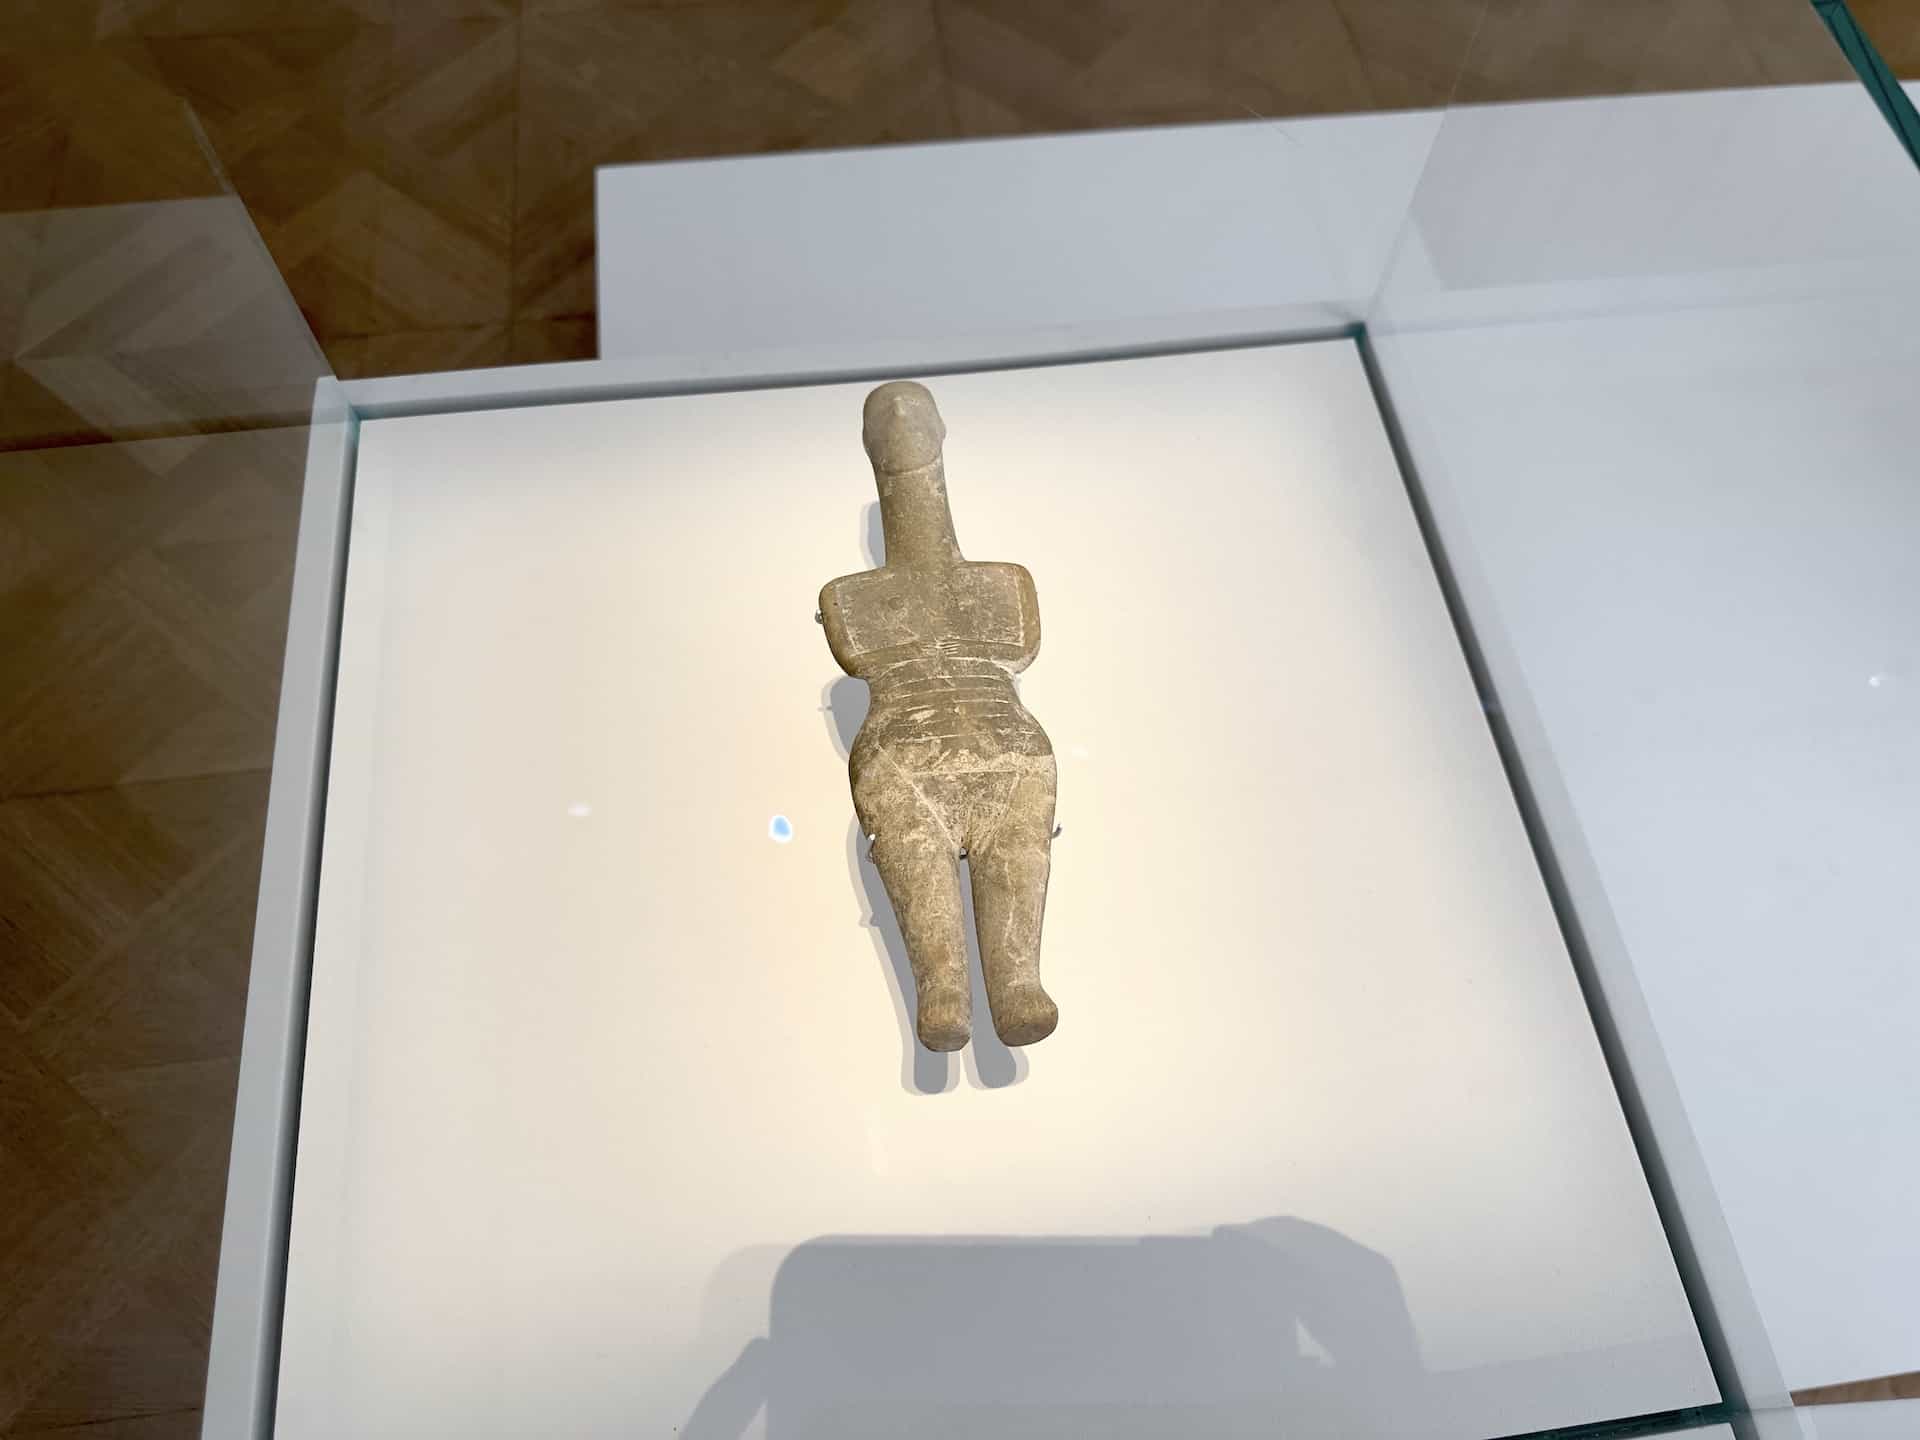 Figurine in Homecoming in the Stathatos Mansion at the Museum of Cycladic Art in Athens, Greece